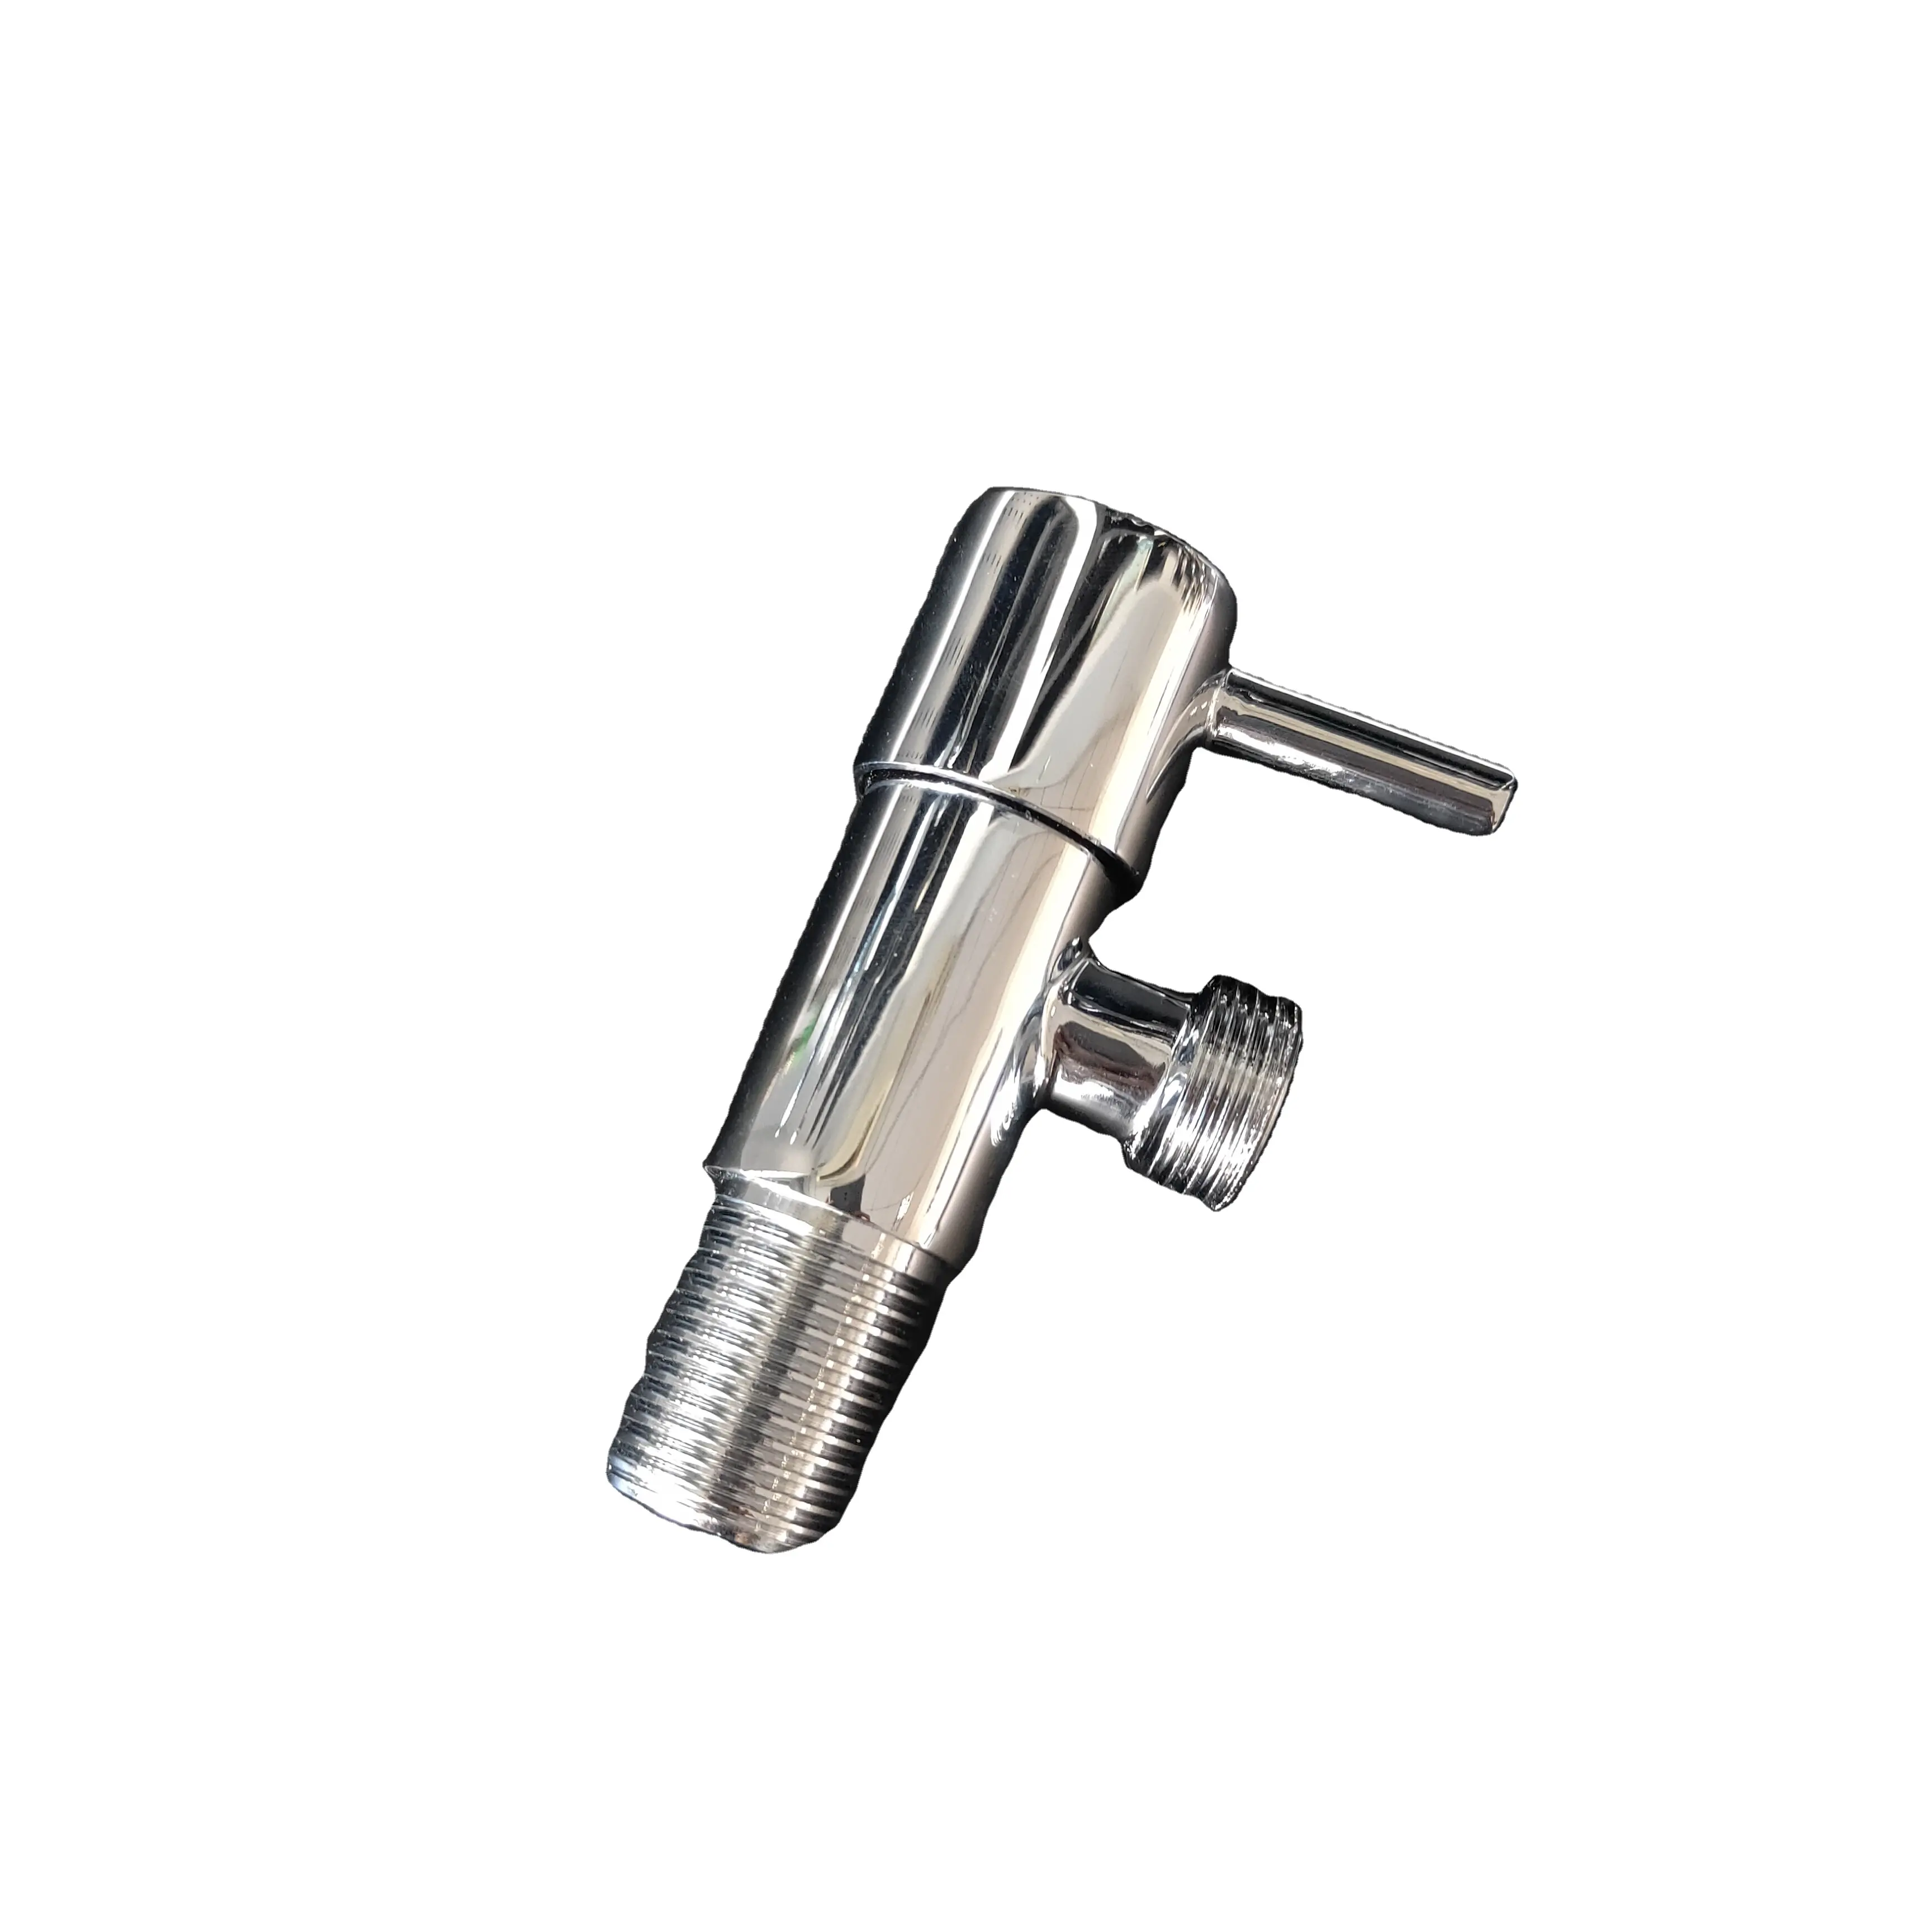 Bathroom Faucet Accessories Water Control Angle Valve